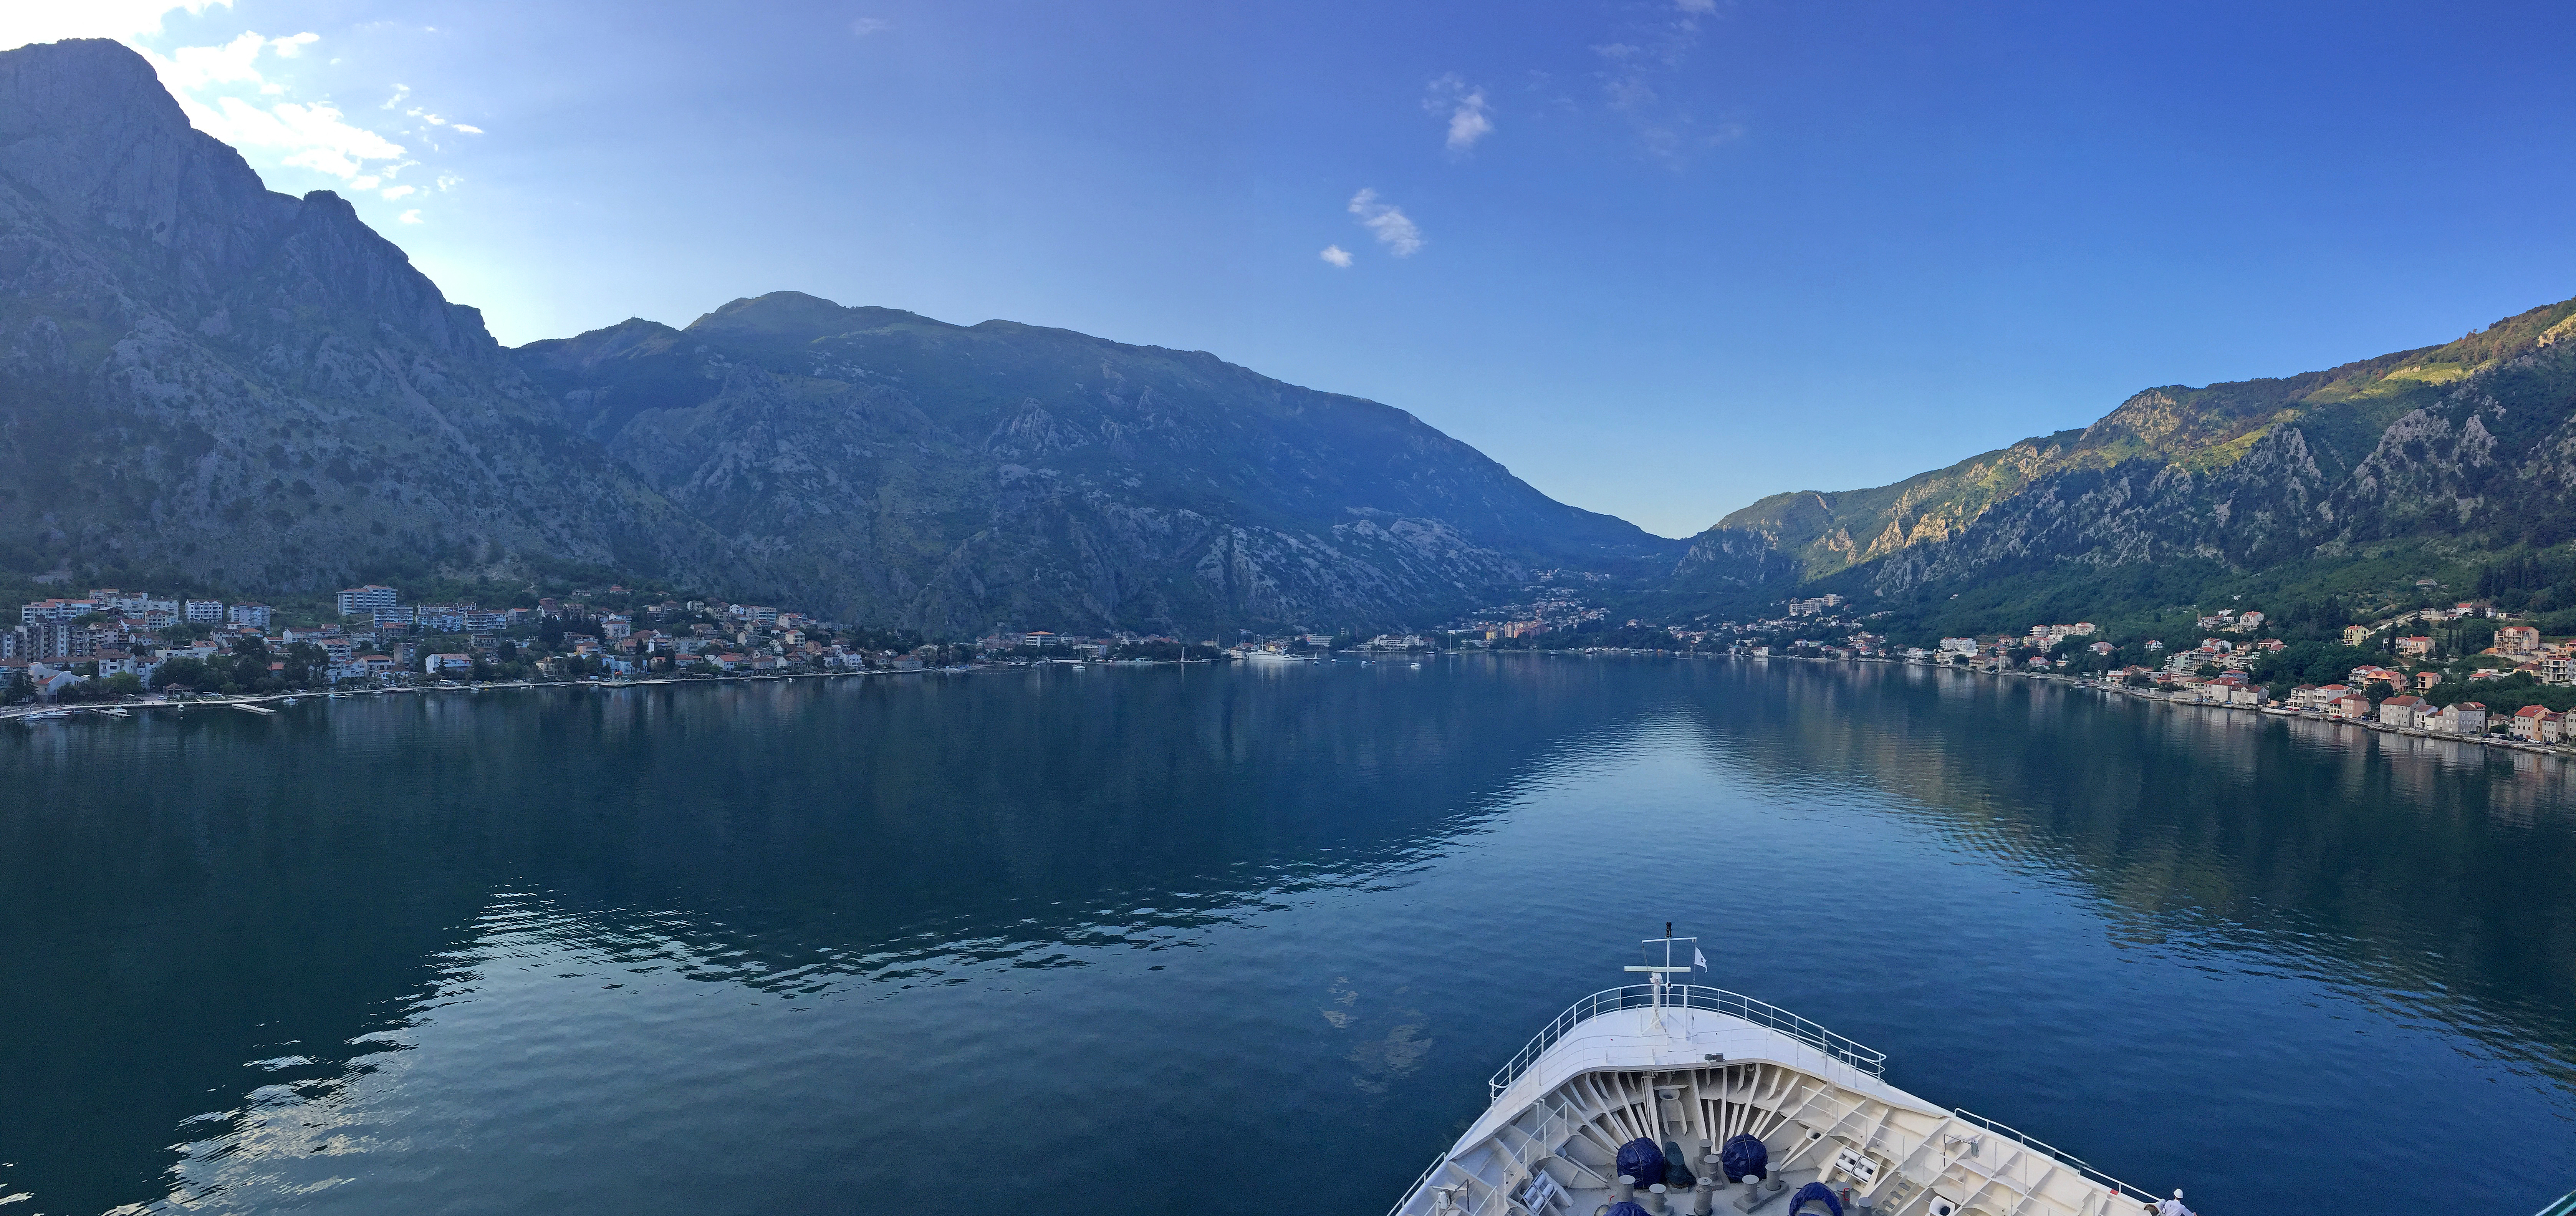 You are currently viewing Hiking up to San Giovanni Castle in Kotor, Montenegro